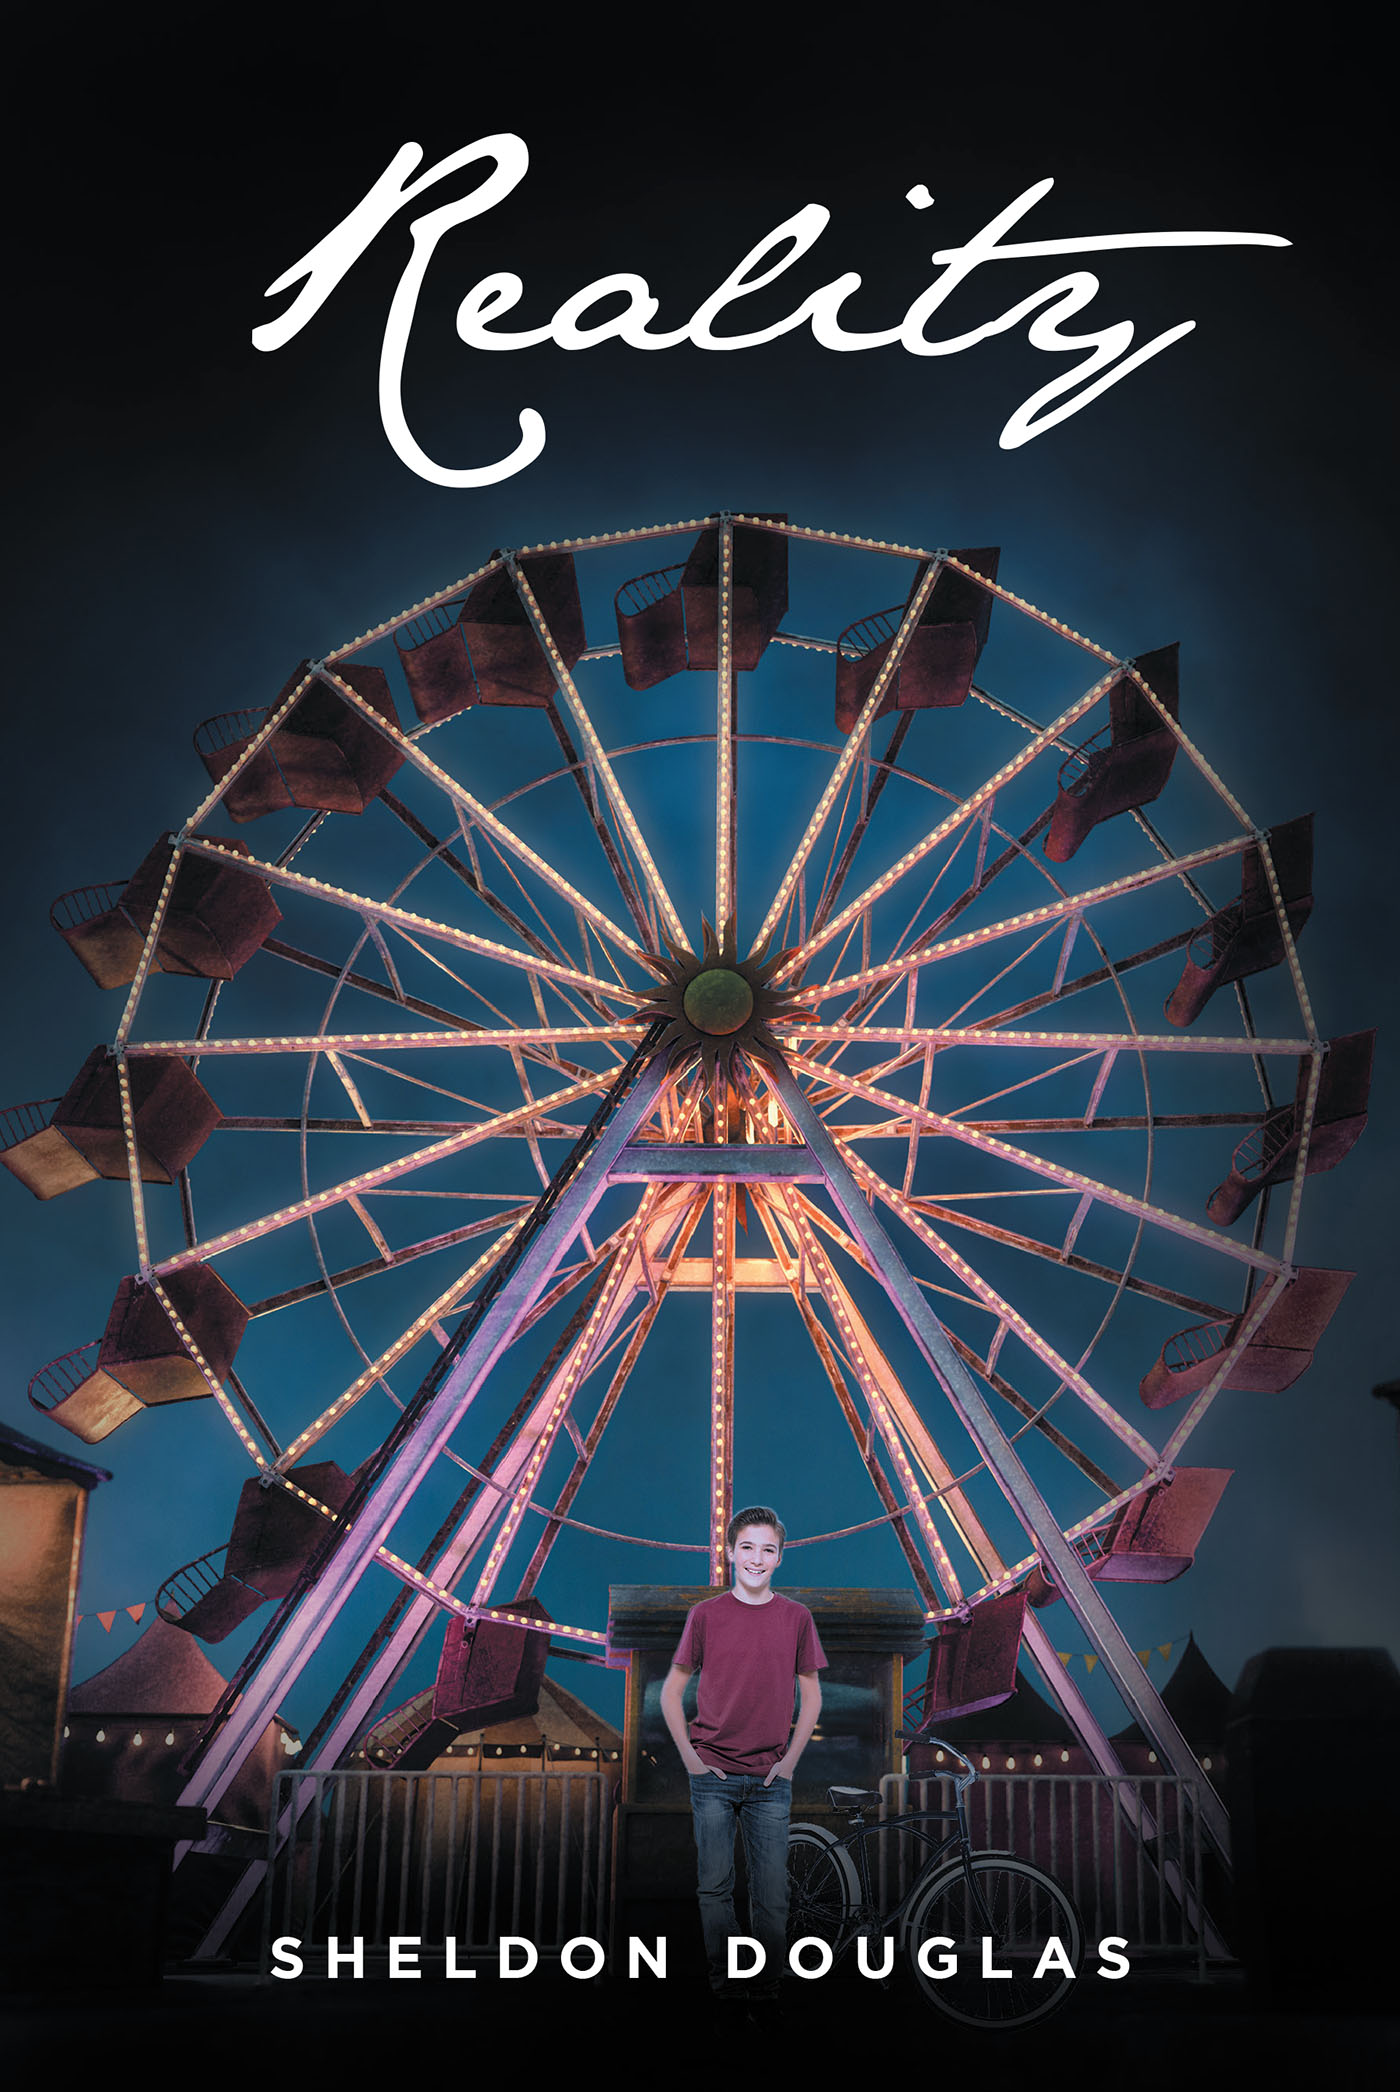 Sheldon Douglas’s New Book, "Reality," is a Moving and Captivating Coming-of-Age Story Centering Around a Young Teen Who Works to Find His Own Path in Life